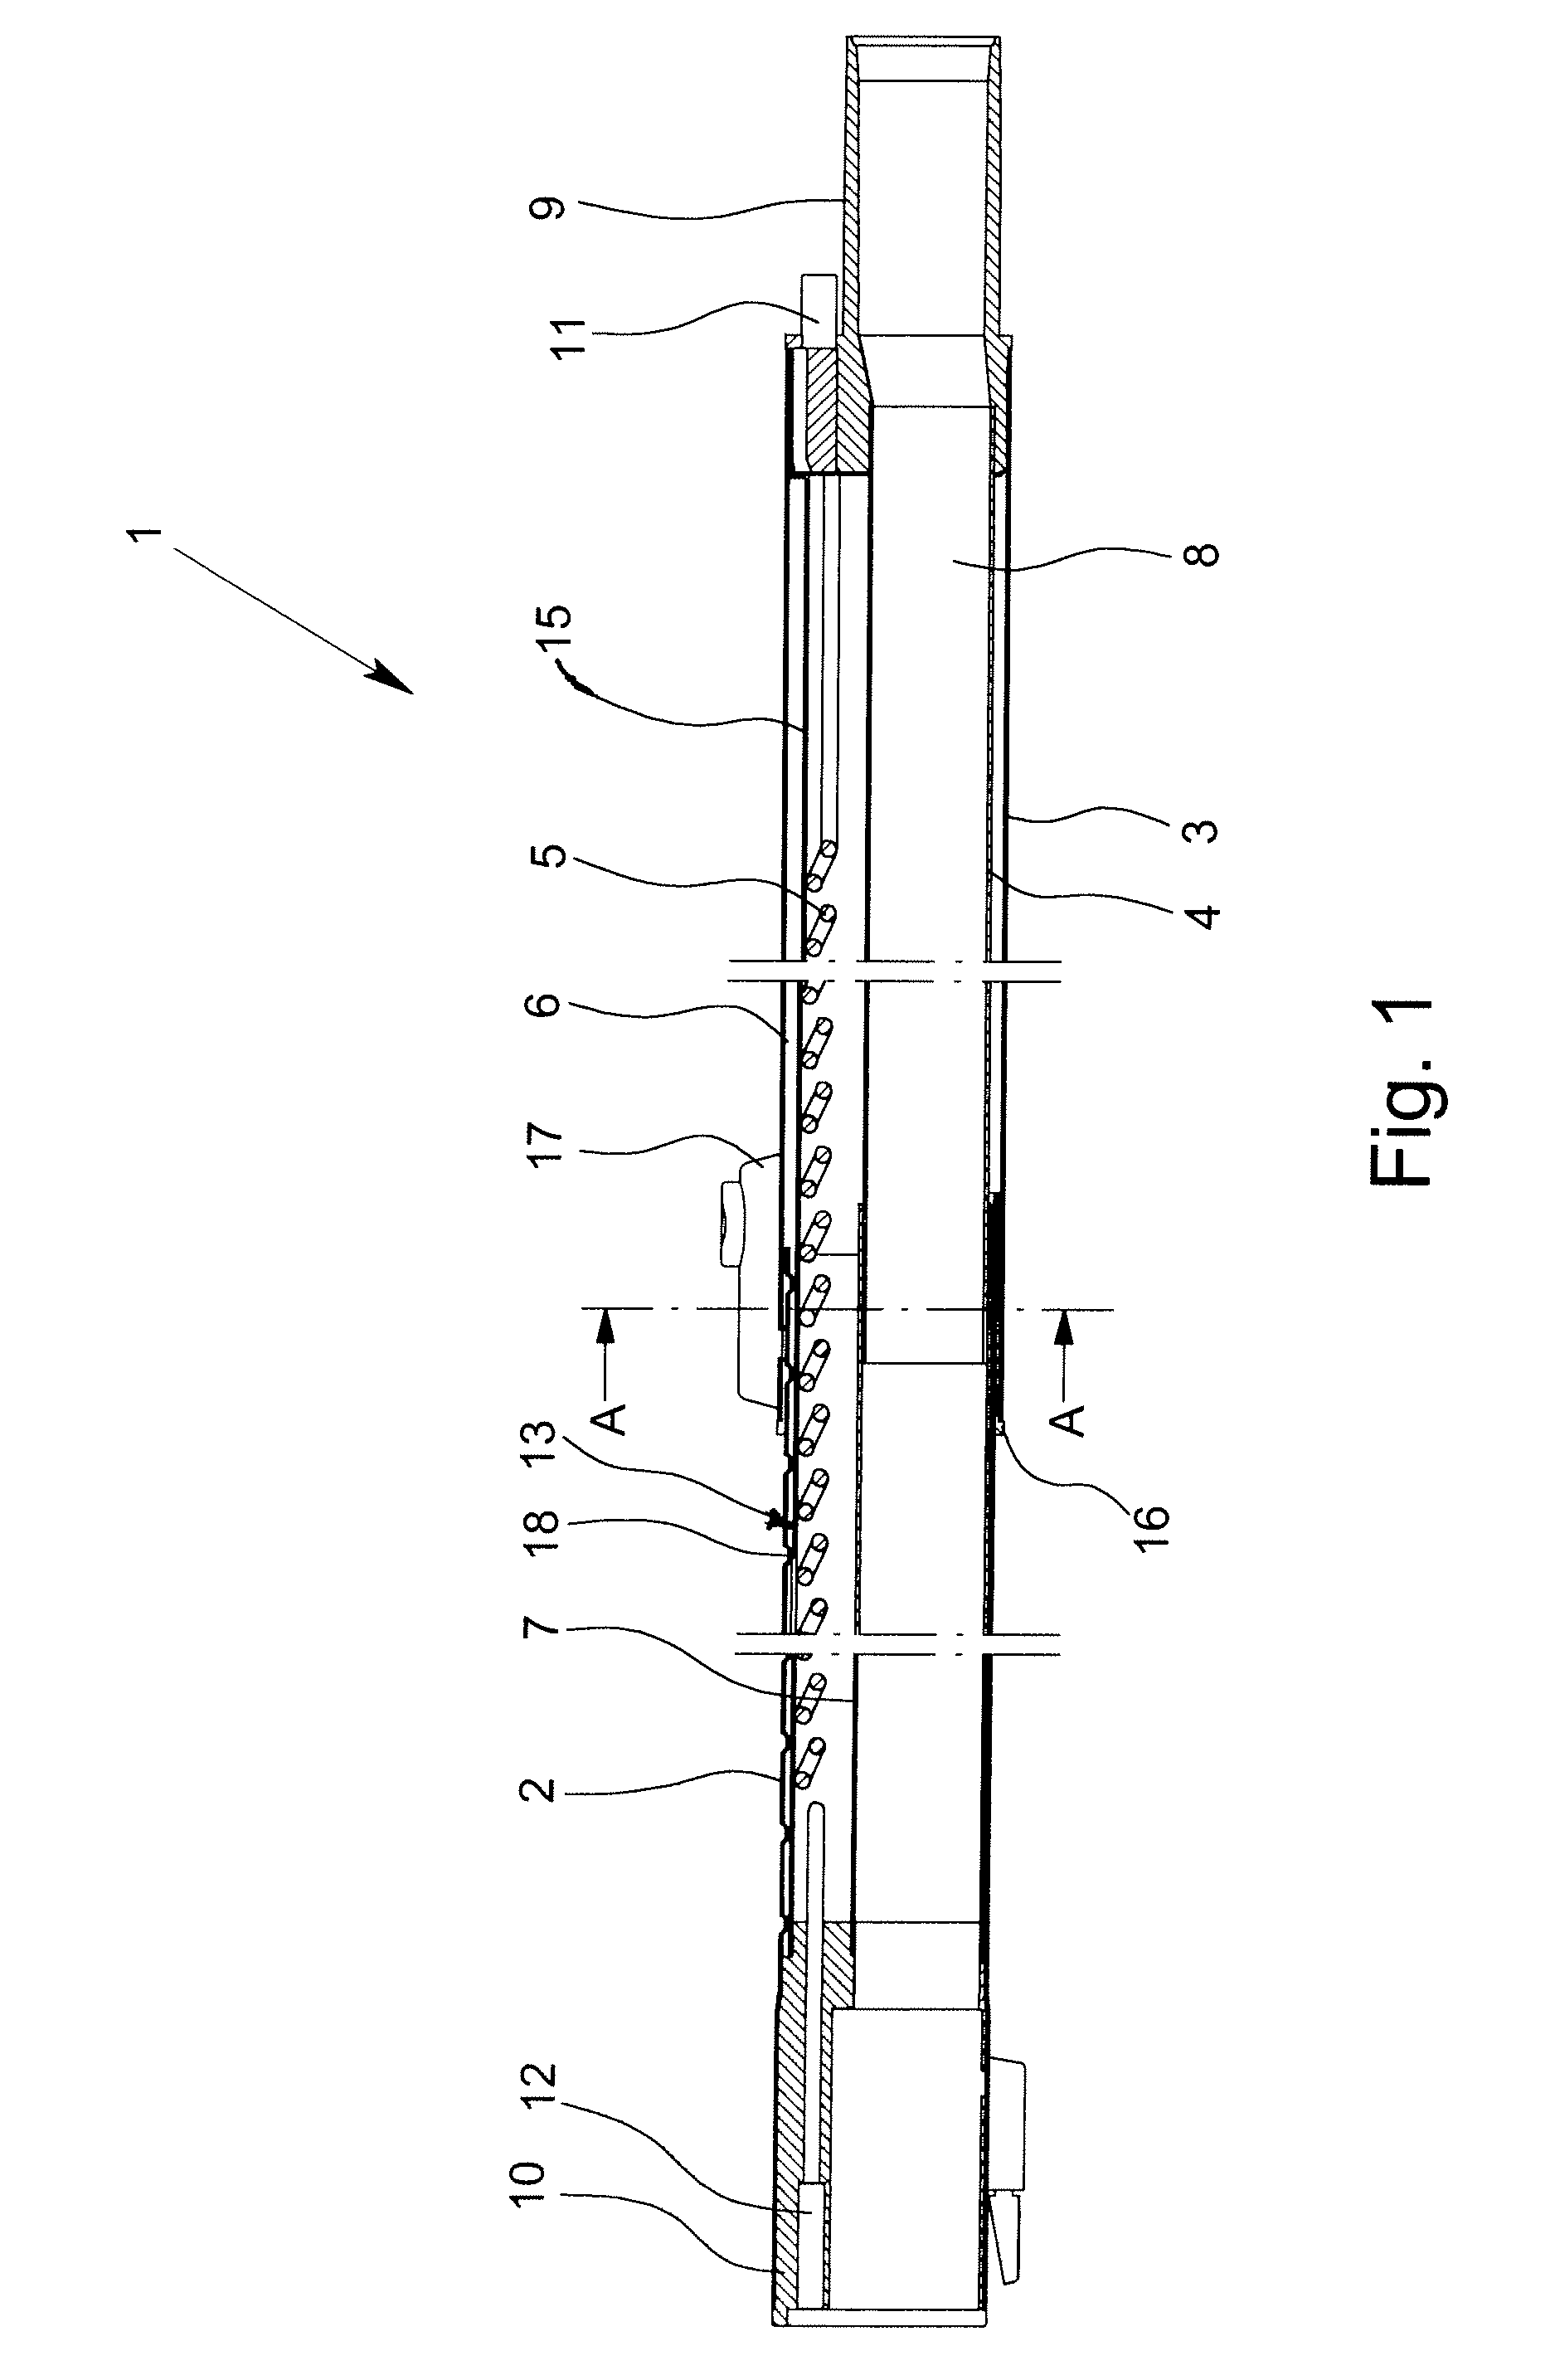 Telescoping tube system for a vacuum cleaner